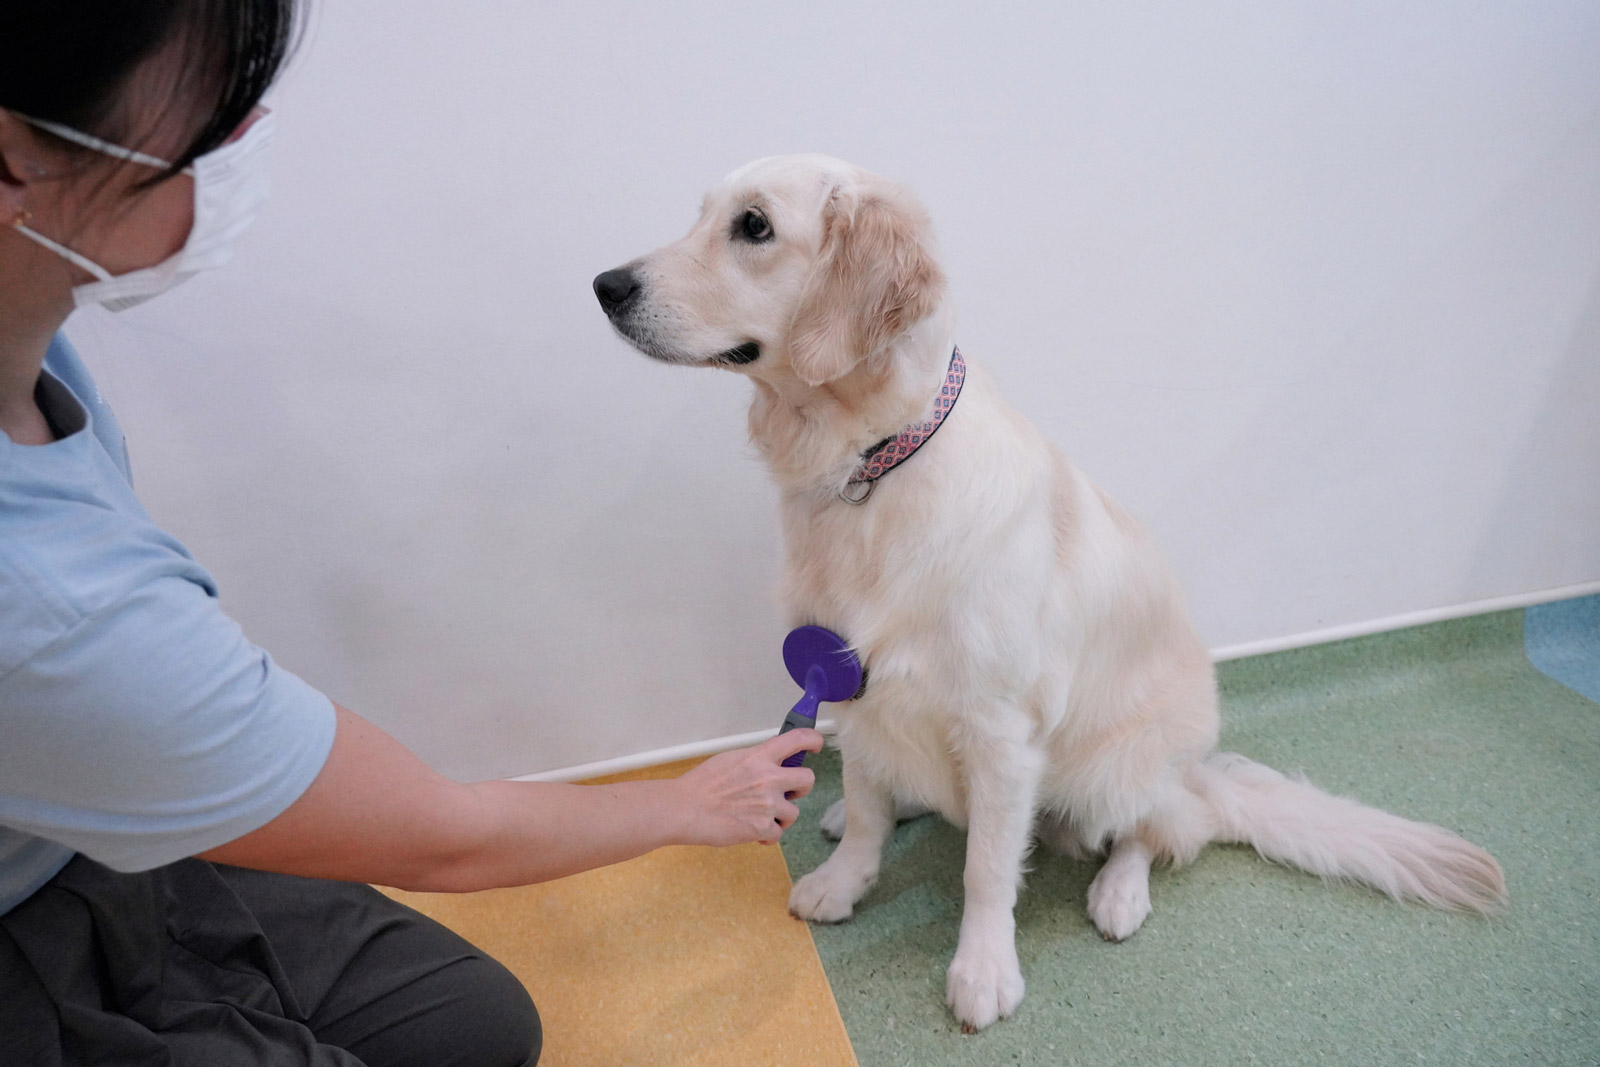 A Golden Retriever have her fur brushed by our trainer.